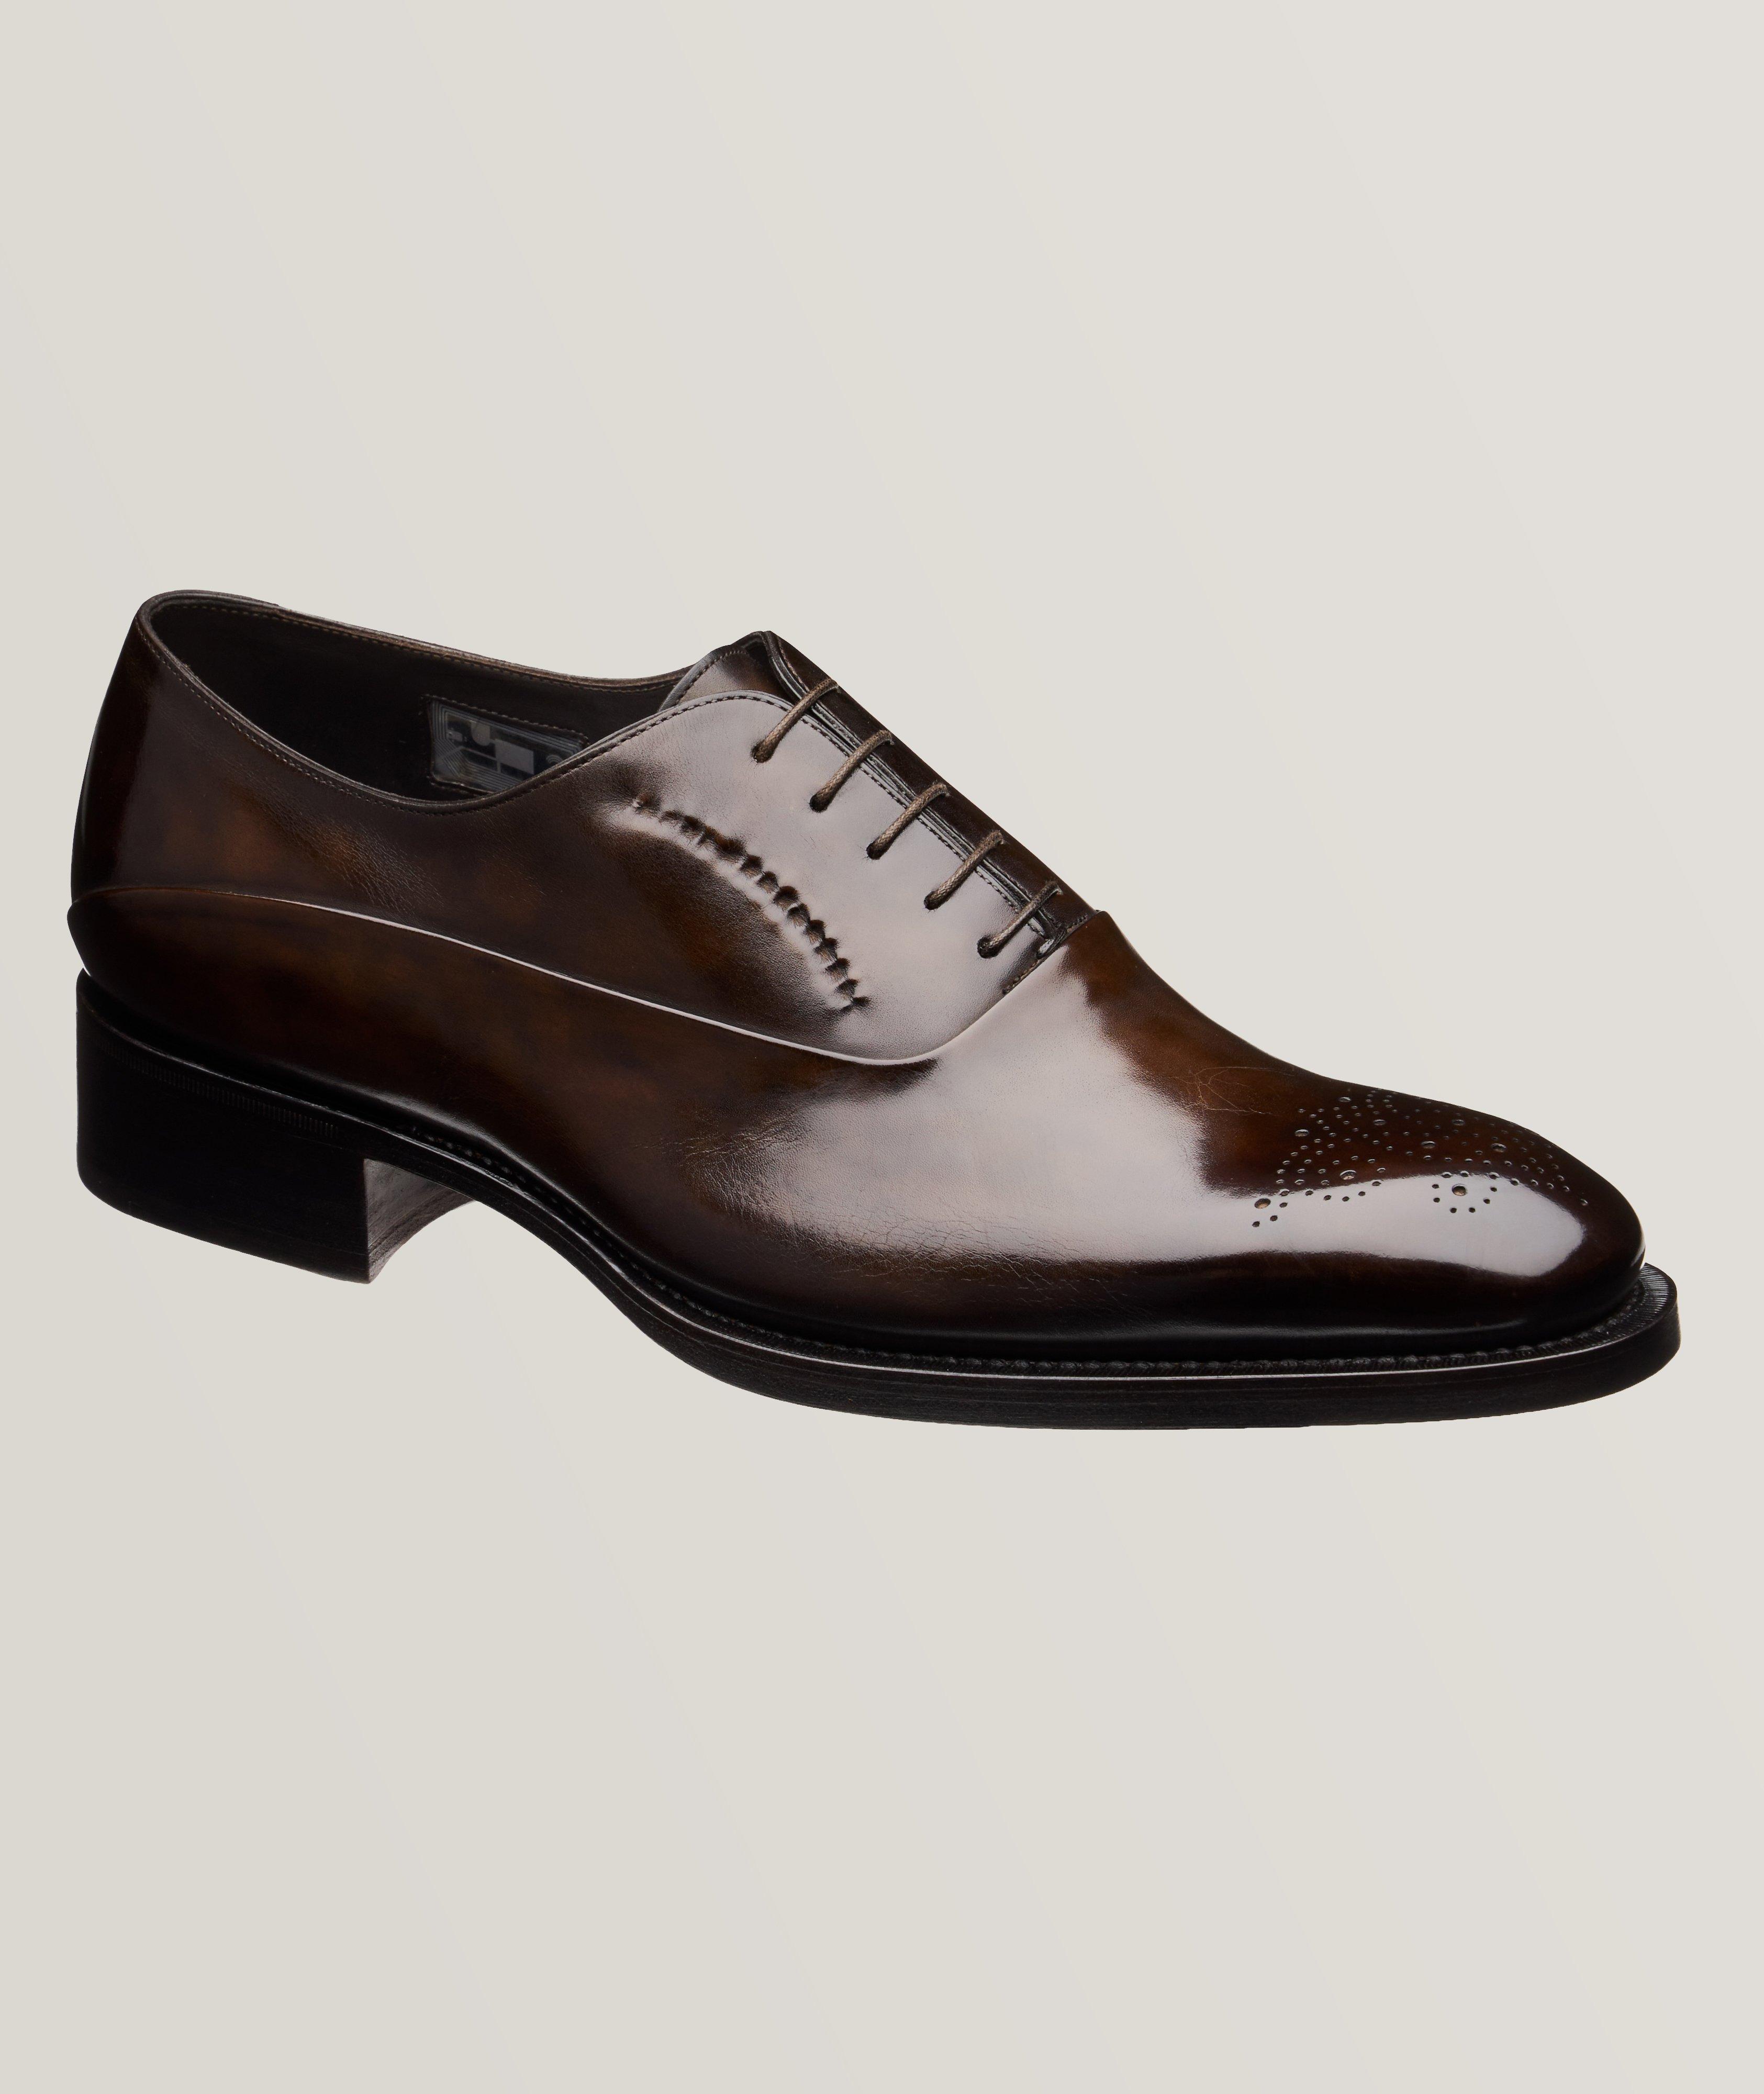 Limited Edition Franc Burnished Leather Reverse Stitch Le Oxford Brogues image 0